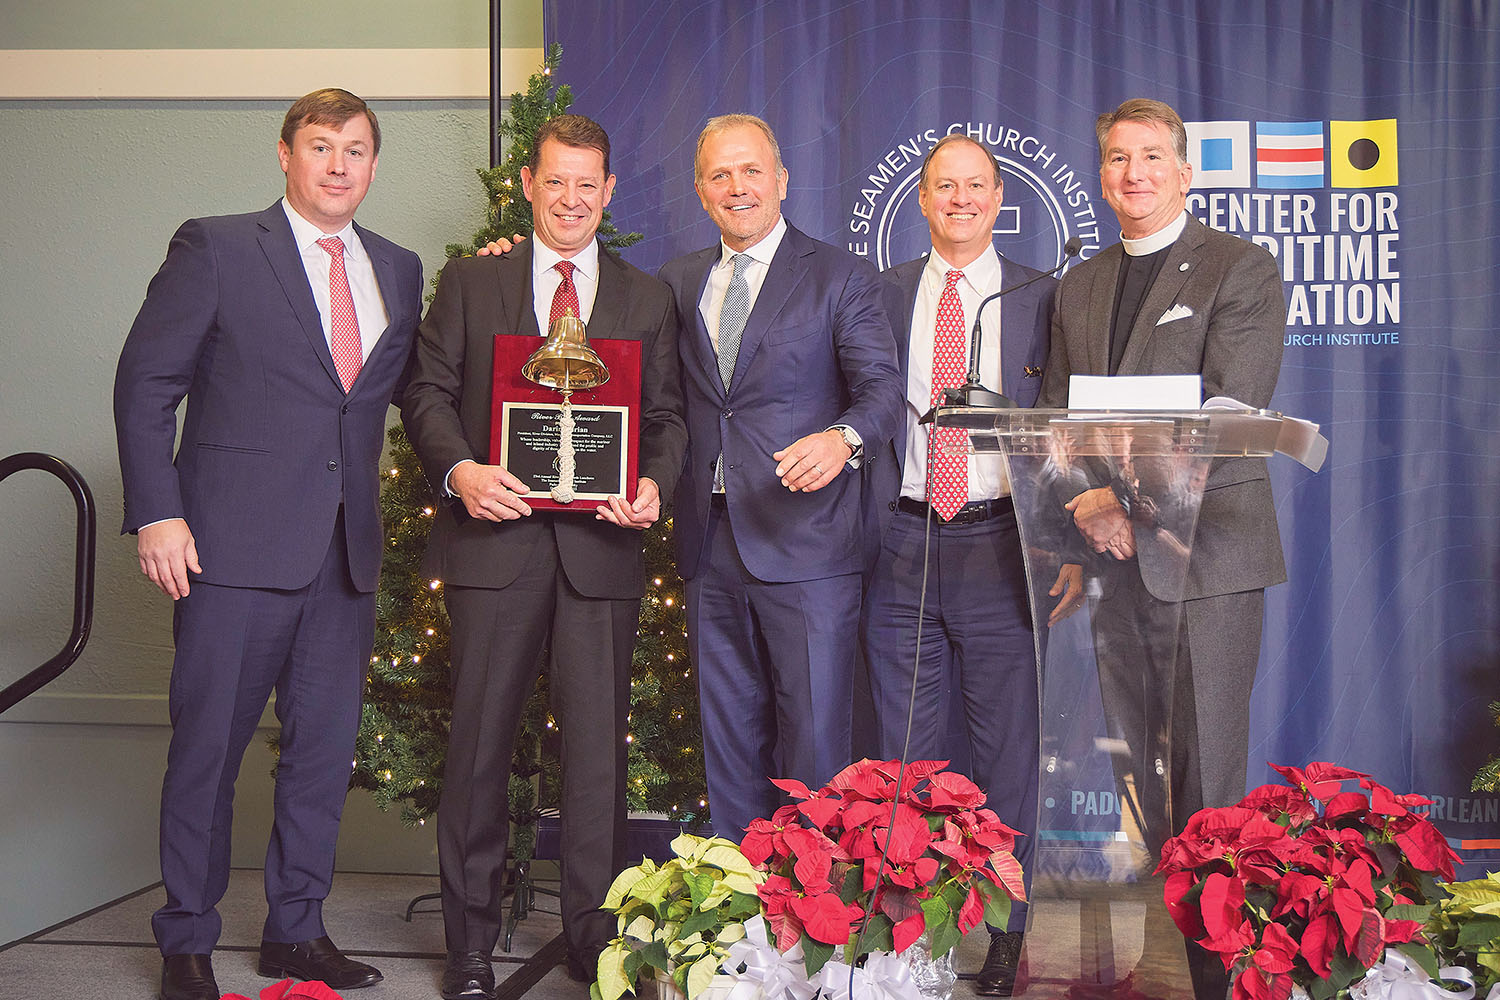 From left: Damon Judd, president and CEO of Marquette Transportation Company; River Bell Award recipient Darin Adrian, Marquette president-river division; John Eckstein, Marquette executive chairman; Merritt Lane, president and CEO of Canal Barge Company; and the Rev. Mark Nestlehutt, president and executive director of SCI. (Photo courtesy of Seamen's Church Institute)